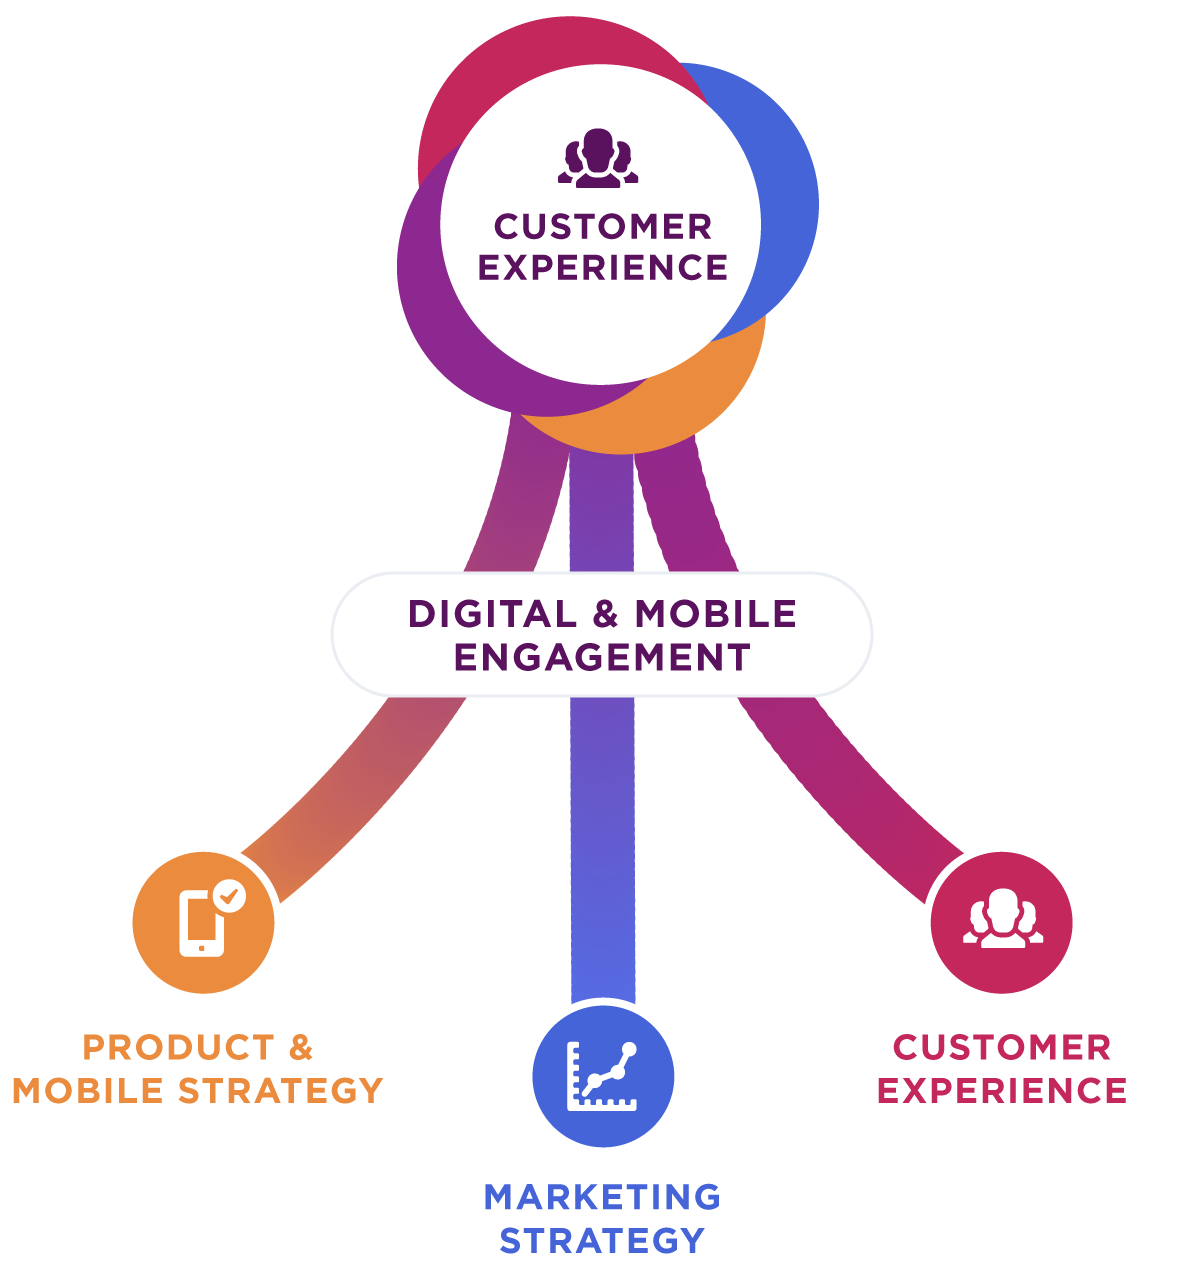 'Customer Experience'; points to 'Digital & Mobile Engagement'; points to 'Product & Mobile Strategy'. 'Customer Experience'; points to 'Digital & Mobile Engagement'; points to 'Marketing Strategy'. 'Customer Experience'; points to 'Digital & Mobile Engagement'; points to 'Customer Experience'.